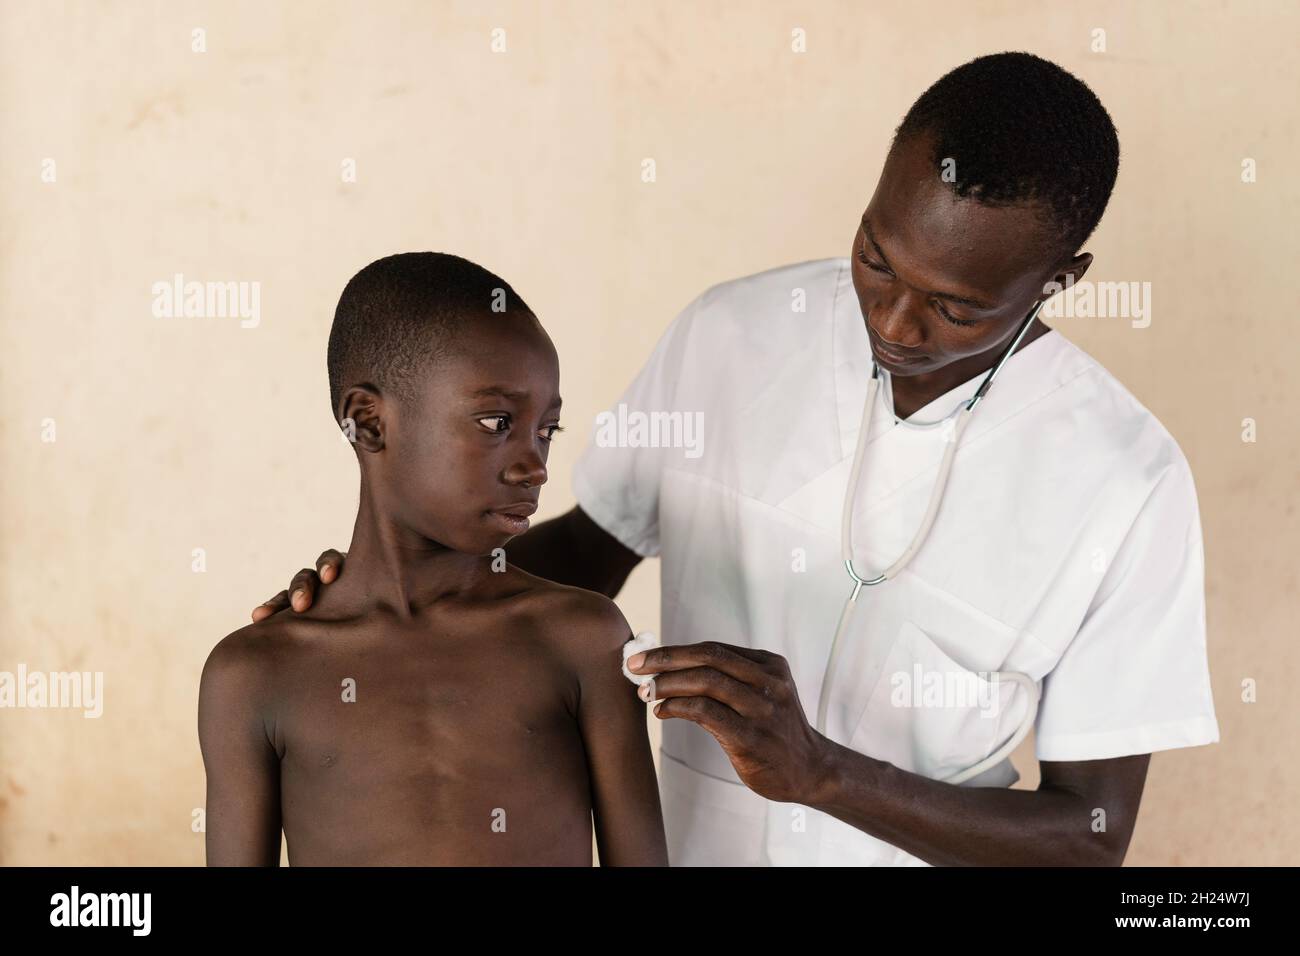 In this image, a doctor is disinfecting the injection site on a black boy's arm after malaria vaccination in West Africa Stock Photo